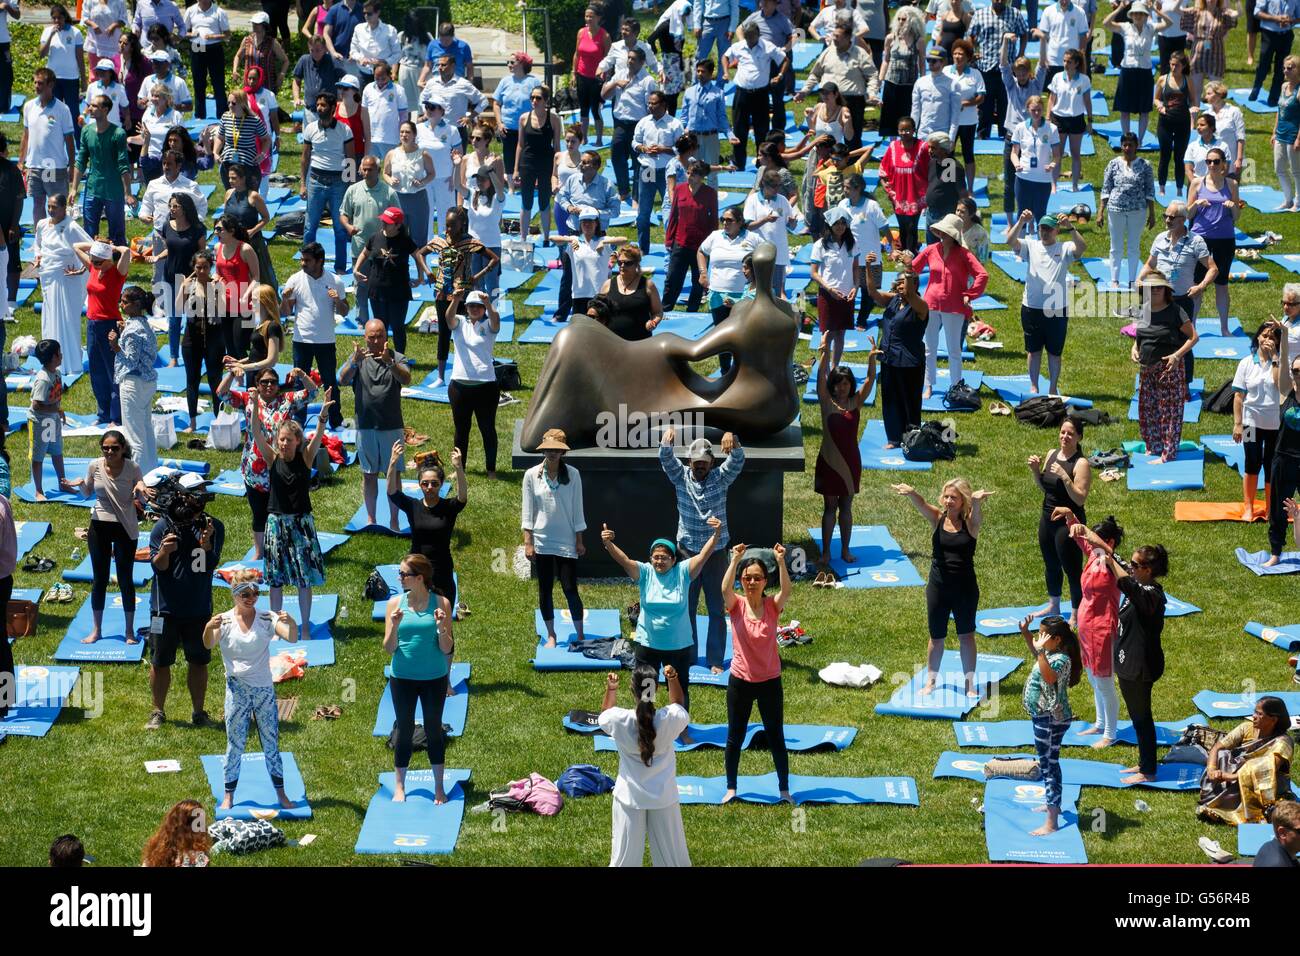 United Nations. 11th Dec, 2014. People attend the celebration of the 2016 International Day of Yoga at the United Nations headquarters in New York, June 21, 2016. This is the second annual celebration of the International Day of Yoga at the United Nations. On Dec. 11, 2014, the UN General Assembly proclaimed in its resolution June 21 as International Yoga Day. © Li Muzi/Xinhua/Alamy Live News Stock Photo